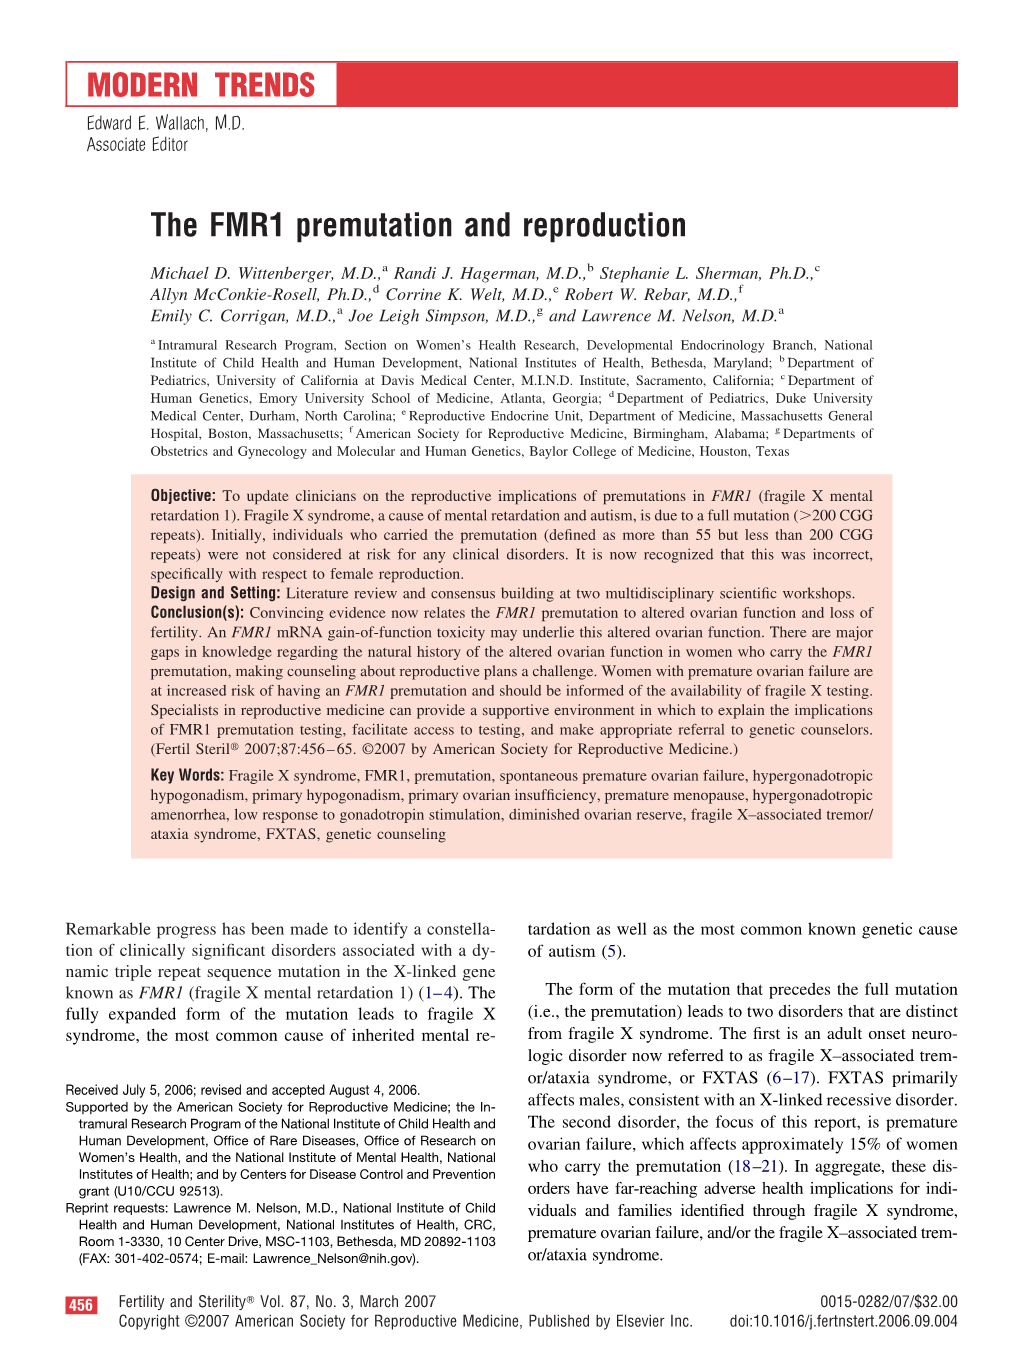 The FMR1 Premutation and Reproduction